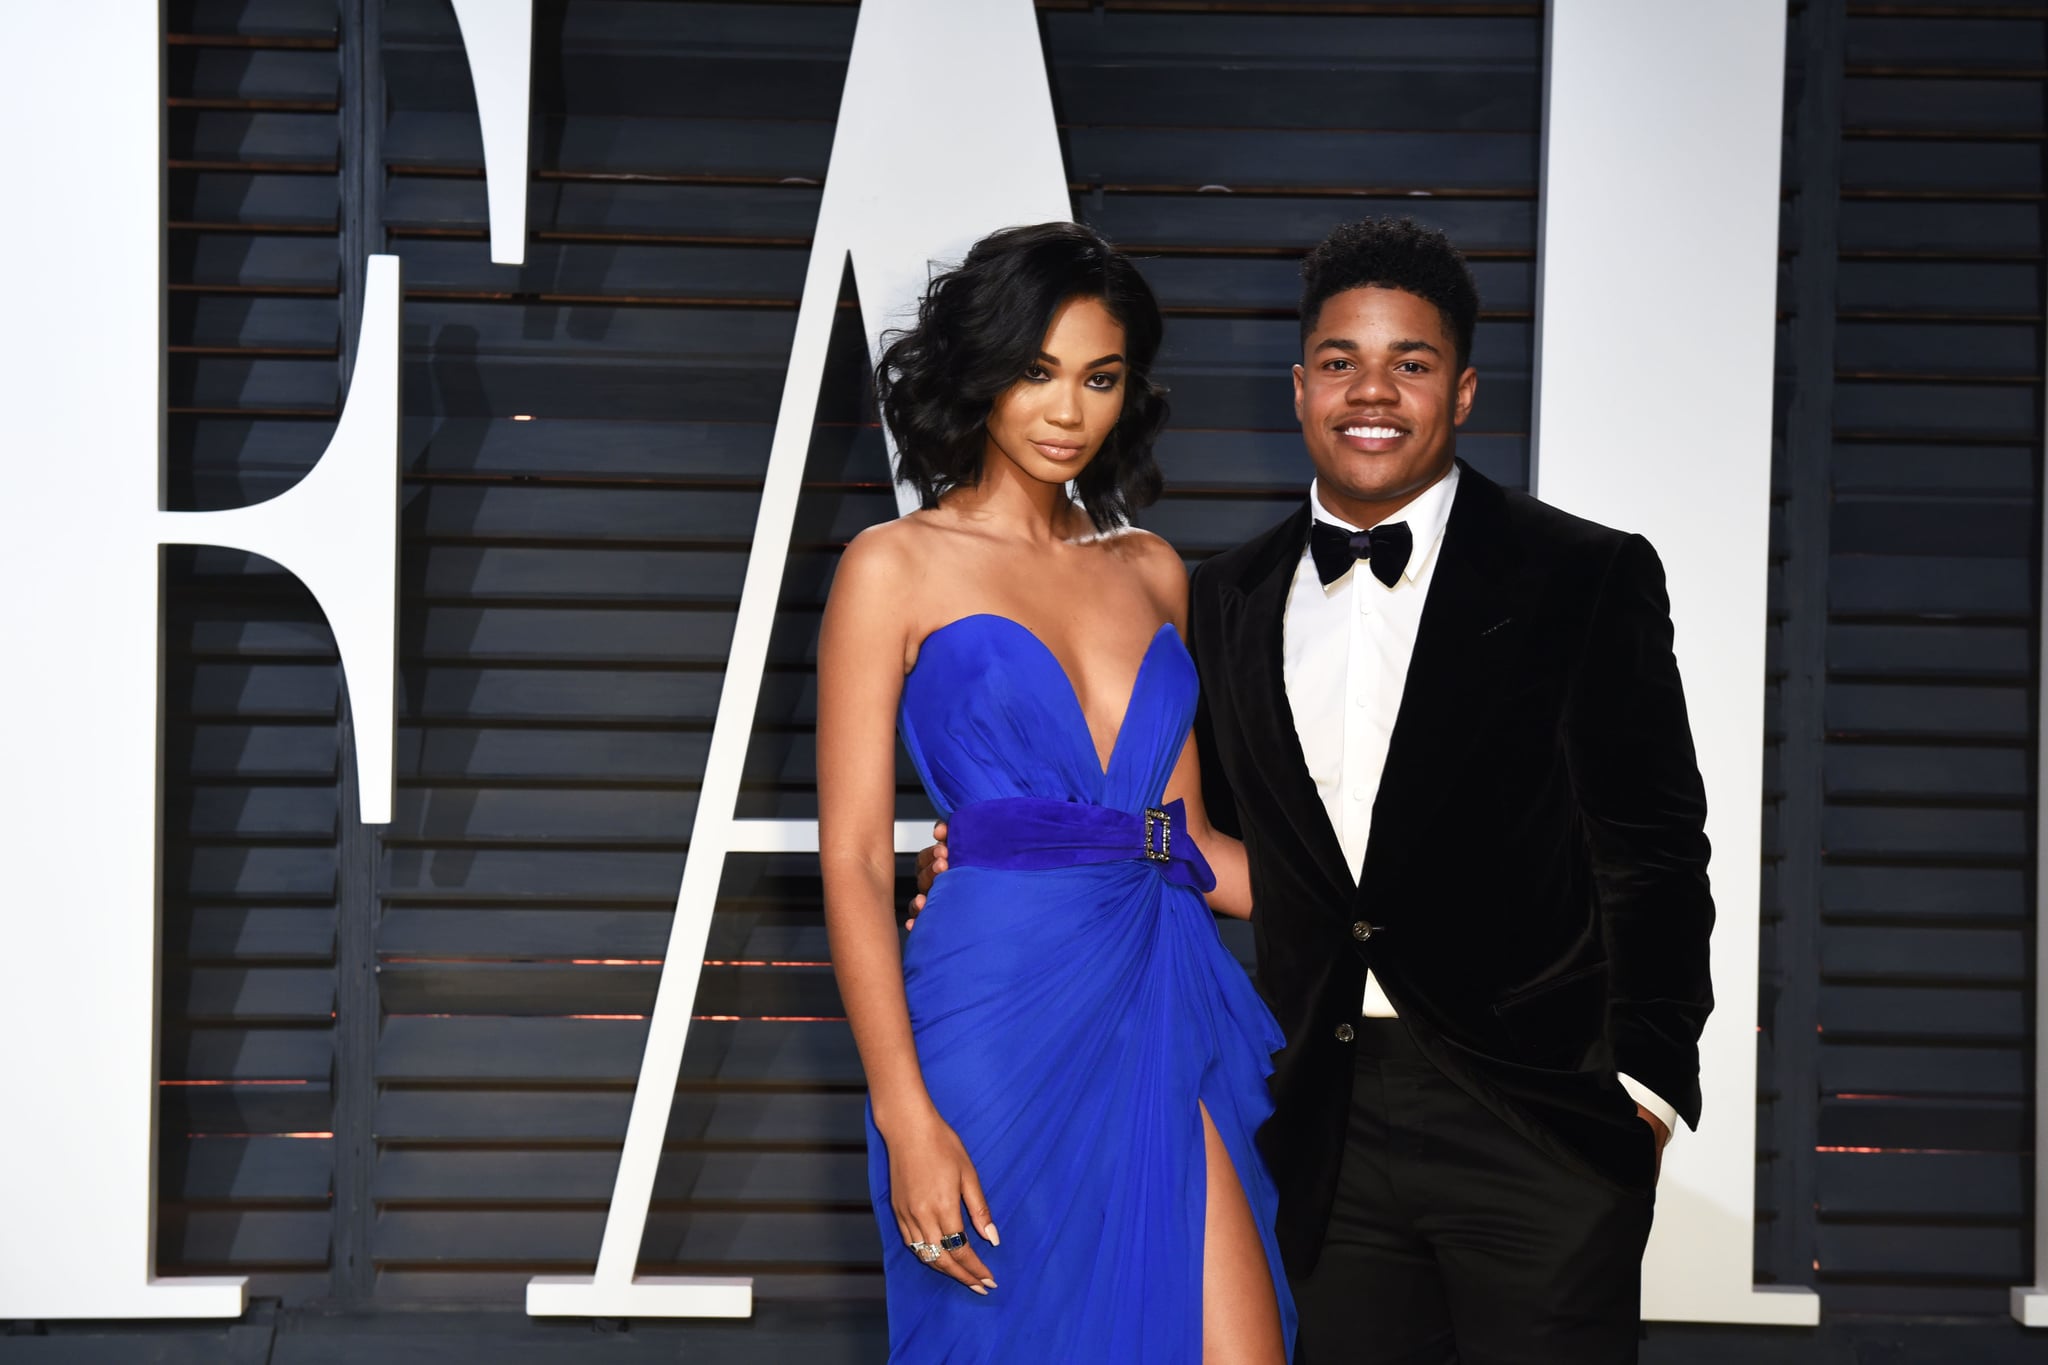 BEVERLY HILLS, CA - FEBRUARY 26:  Chanel Iman and NFL player Sterling Shepard attend the 2017 Vanity Fair Oscar Party hosted by Graydon Carter at Wallis Annenberg Center for the Performing Arts on February 26, 2017 in Beverly Hills, California.  (Photo by Presley Ann Slack/Patrick McMullan via Getty Images)